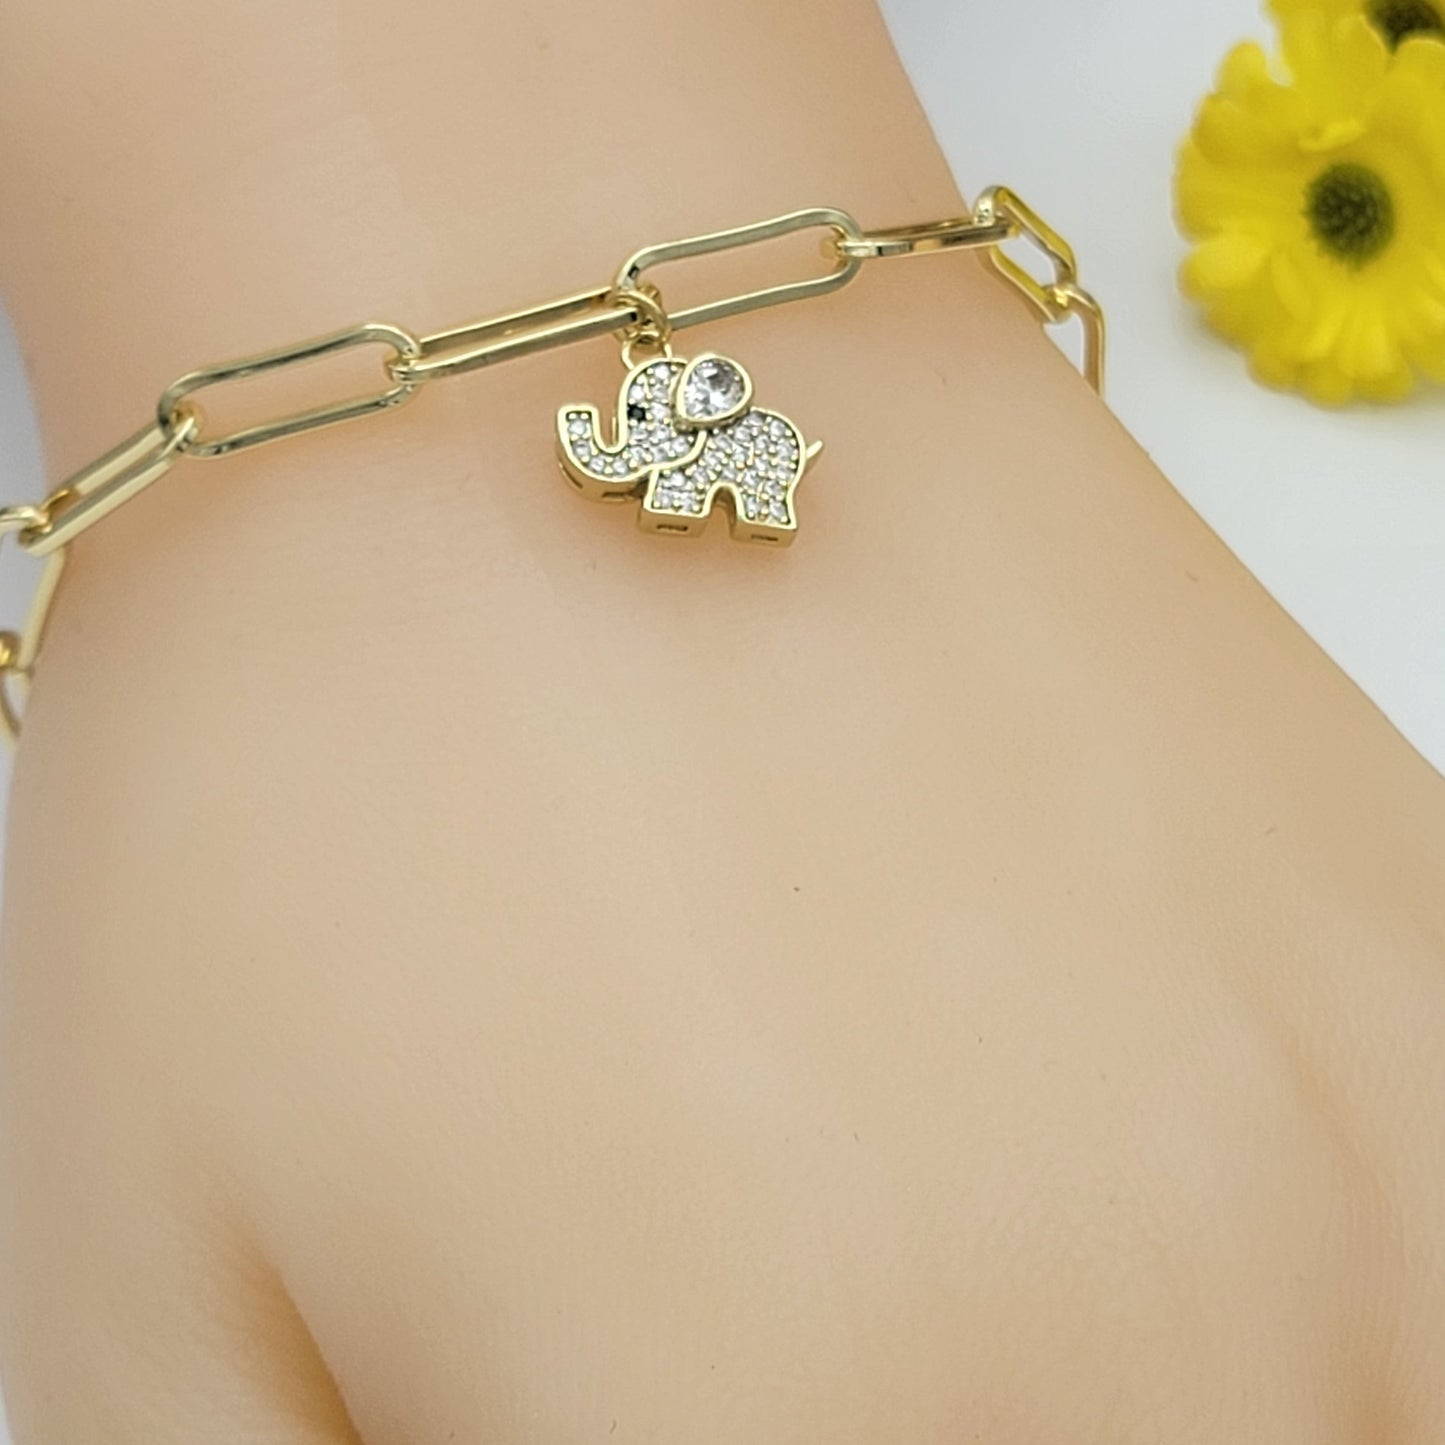 Bracelets - 14K Gold Plated. Cute Elephant Charm. Paperclip Chain style